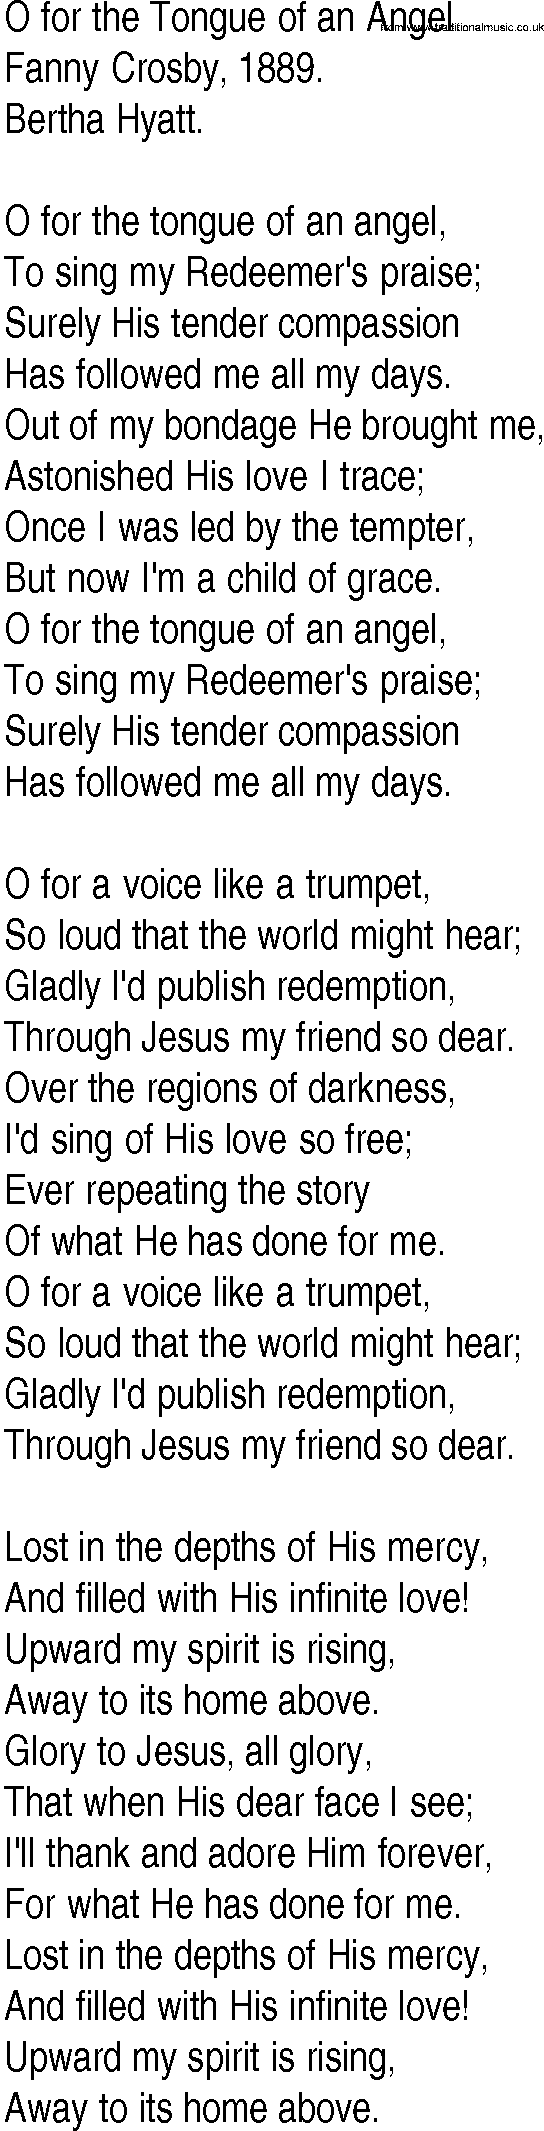 Hymn and Gospel Song: O for the Tongue of an Angel by Fanny Crosby lyrics